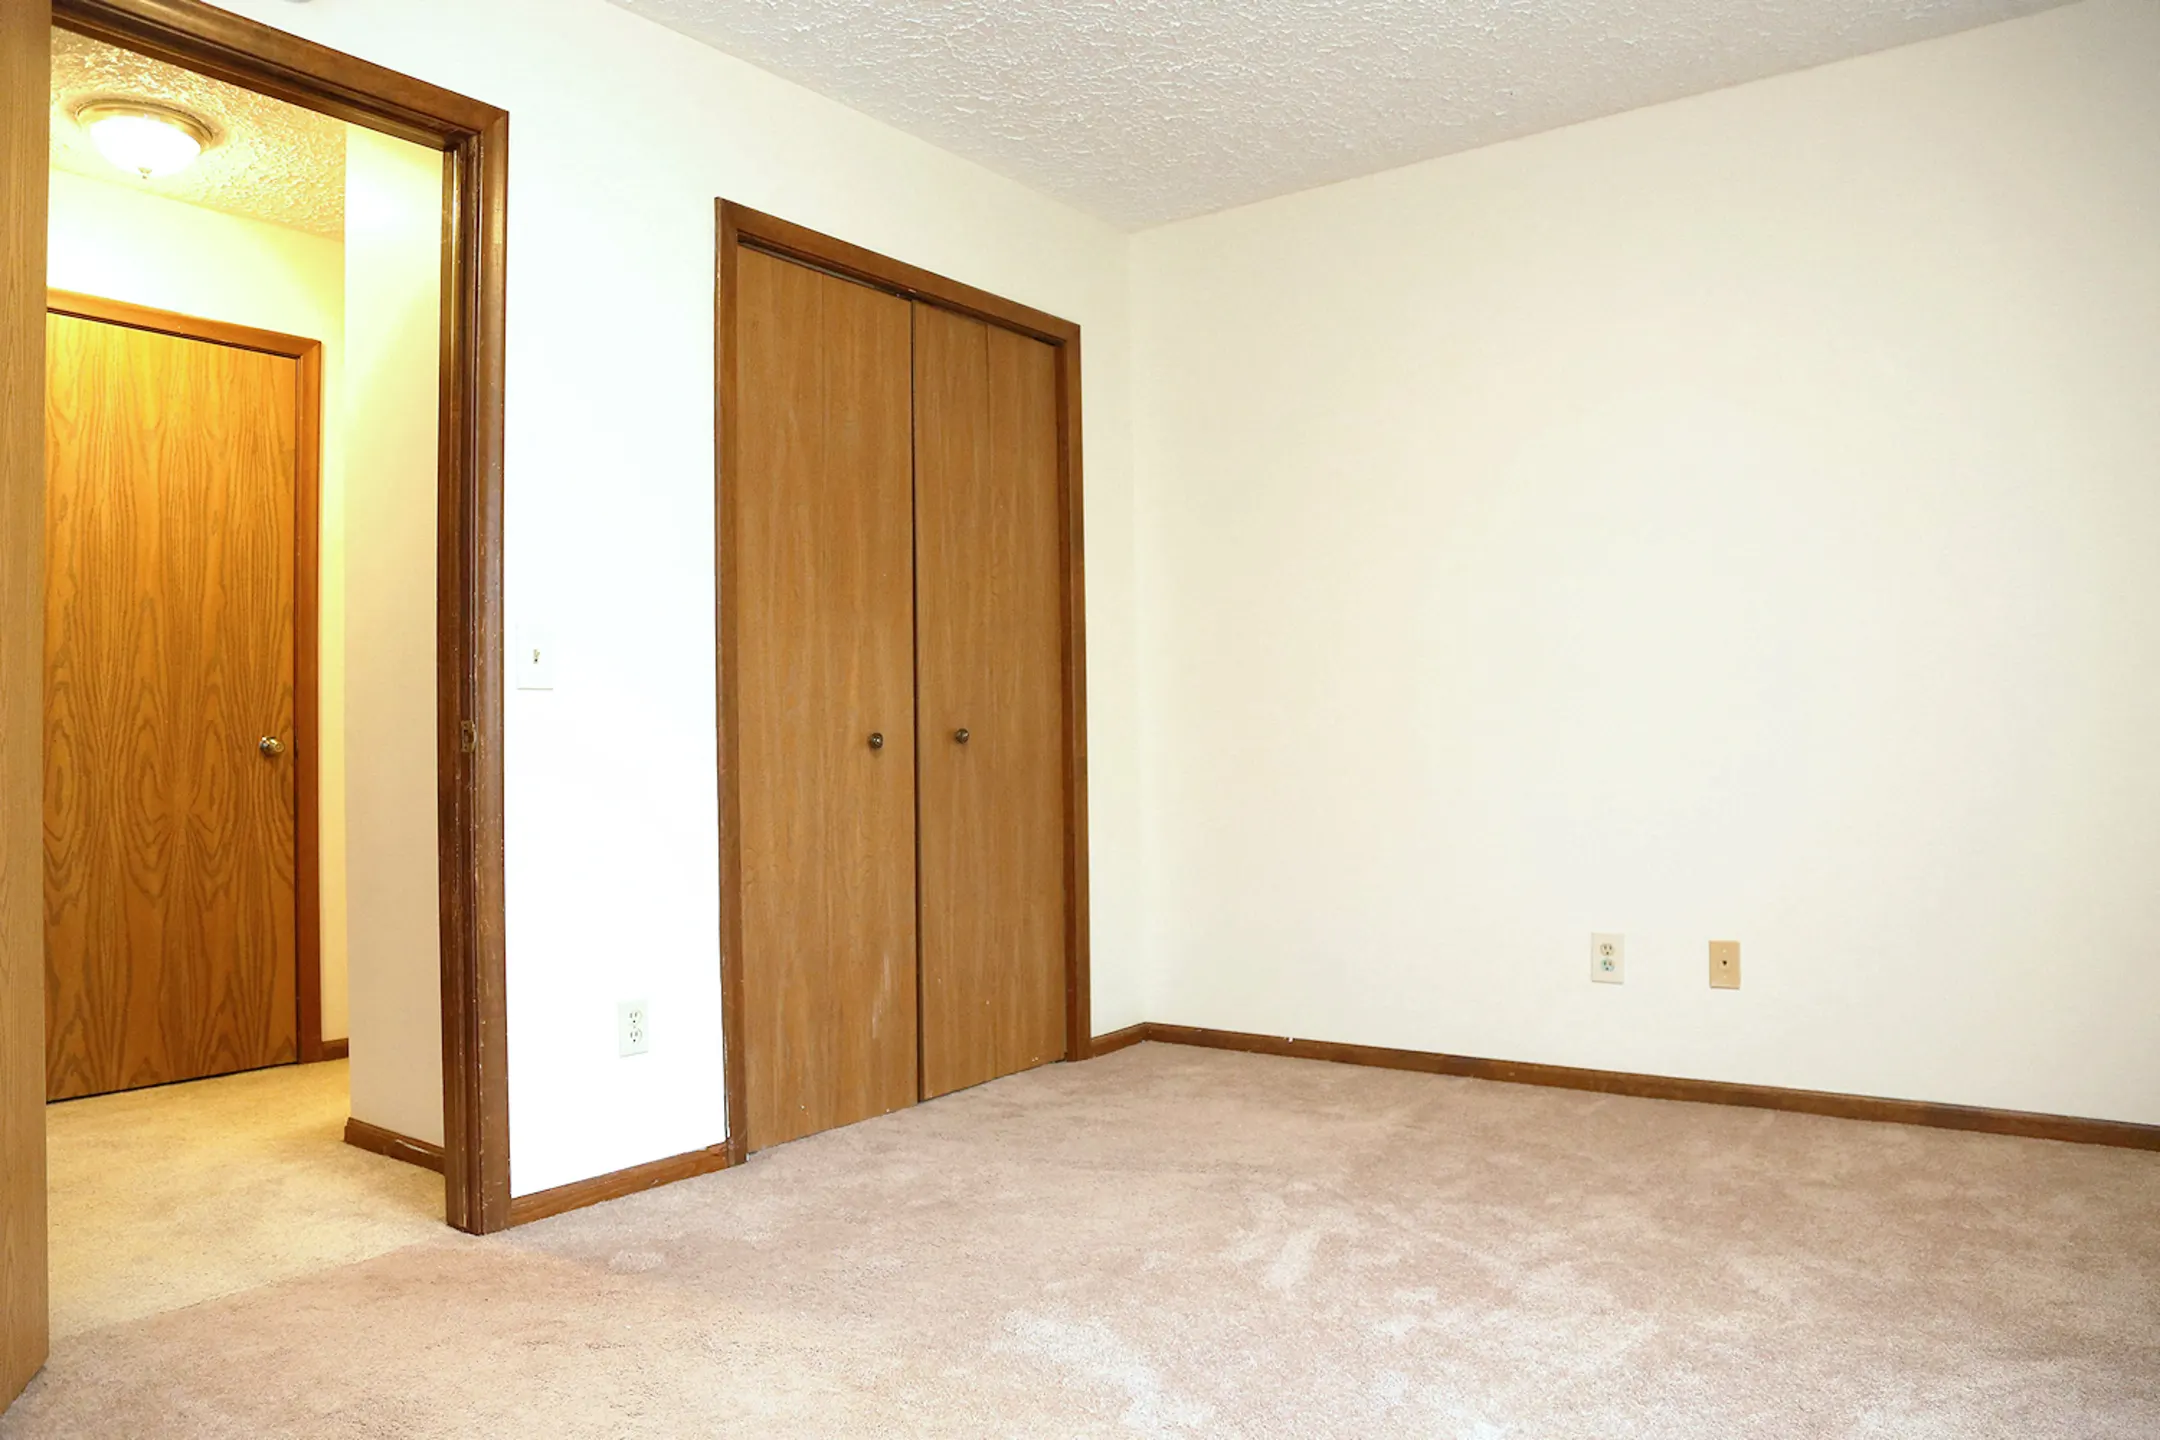 Bedroom - Cambria Heights Apartments & Townhomes - East Lansing, MI